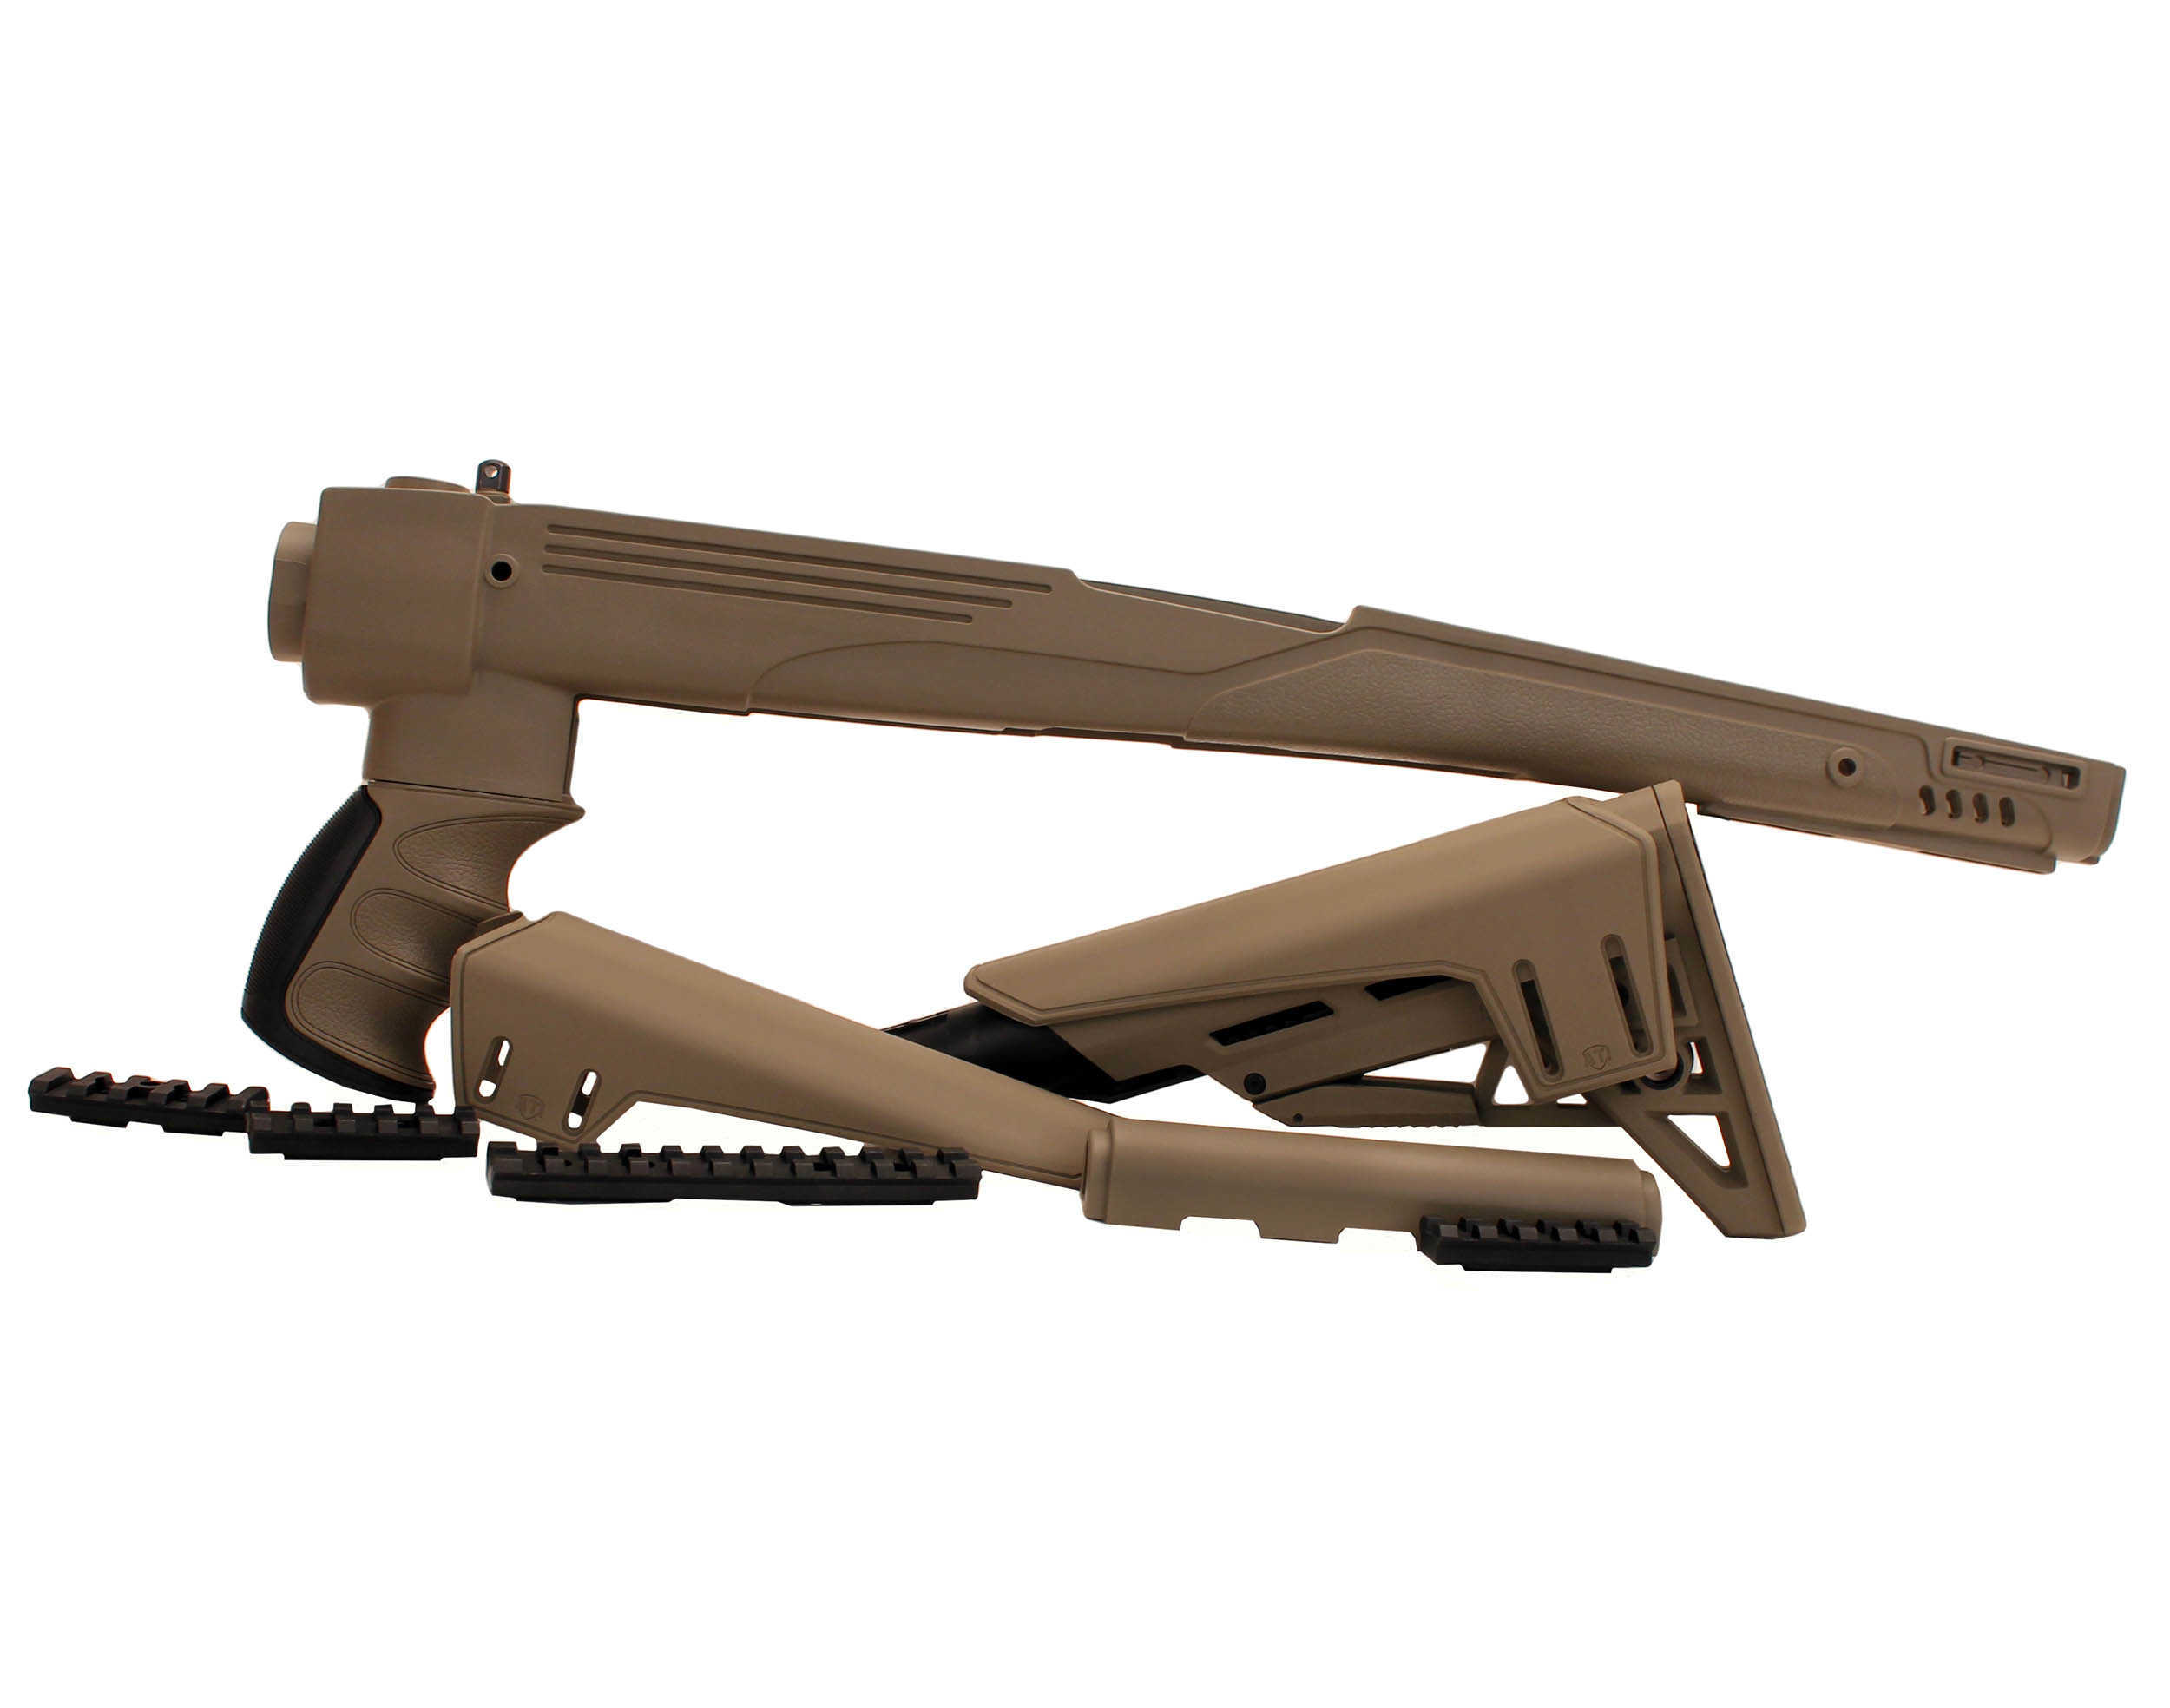 ATI Outdoors B2201232 Strikeforce Flat Dark Earth Synthetic Chassis With Fully Adjustable Folding Stock, X-1 Style Grip,